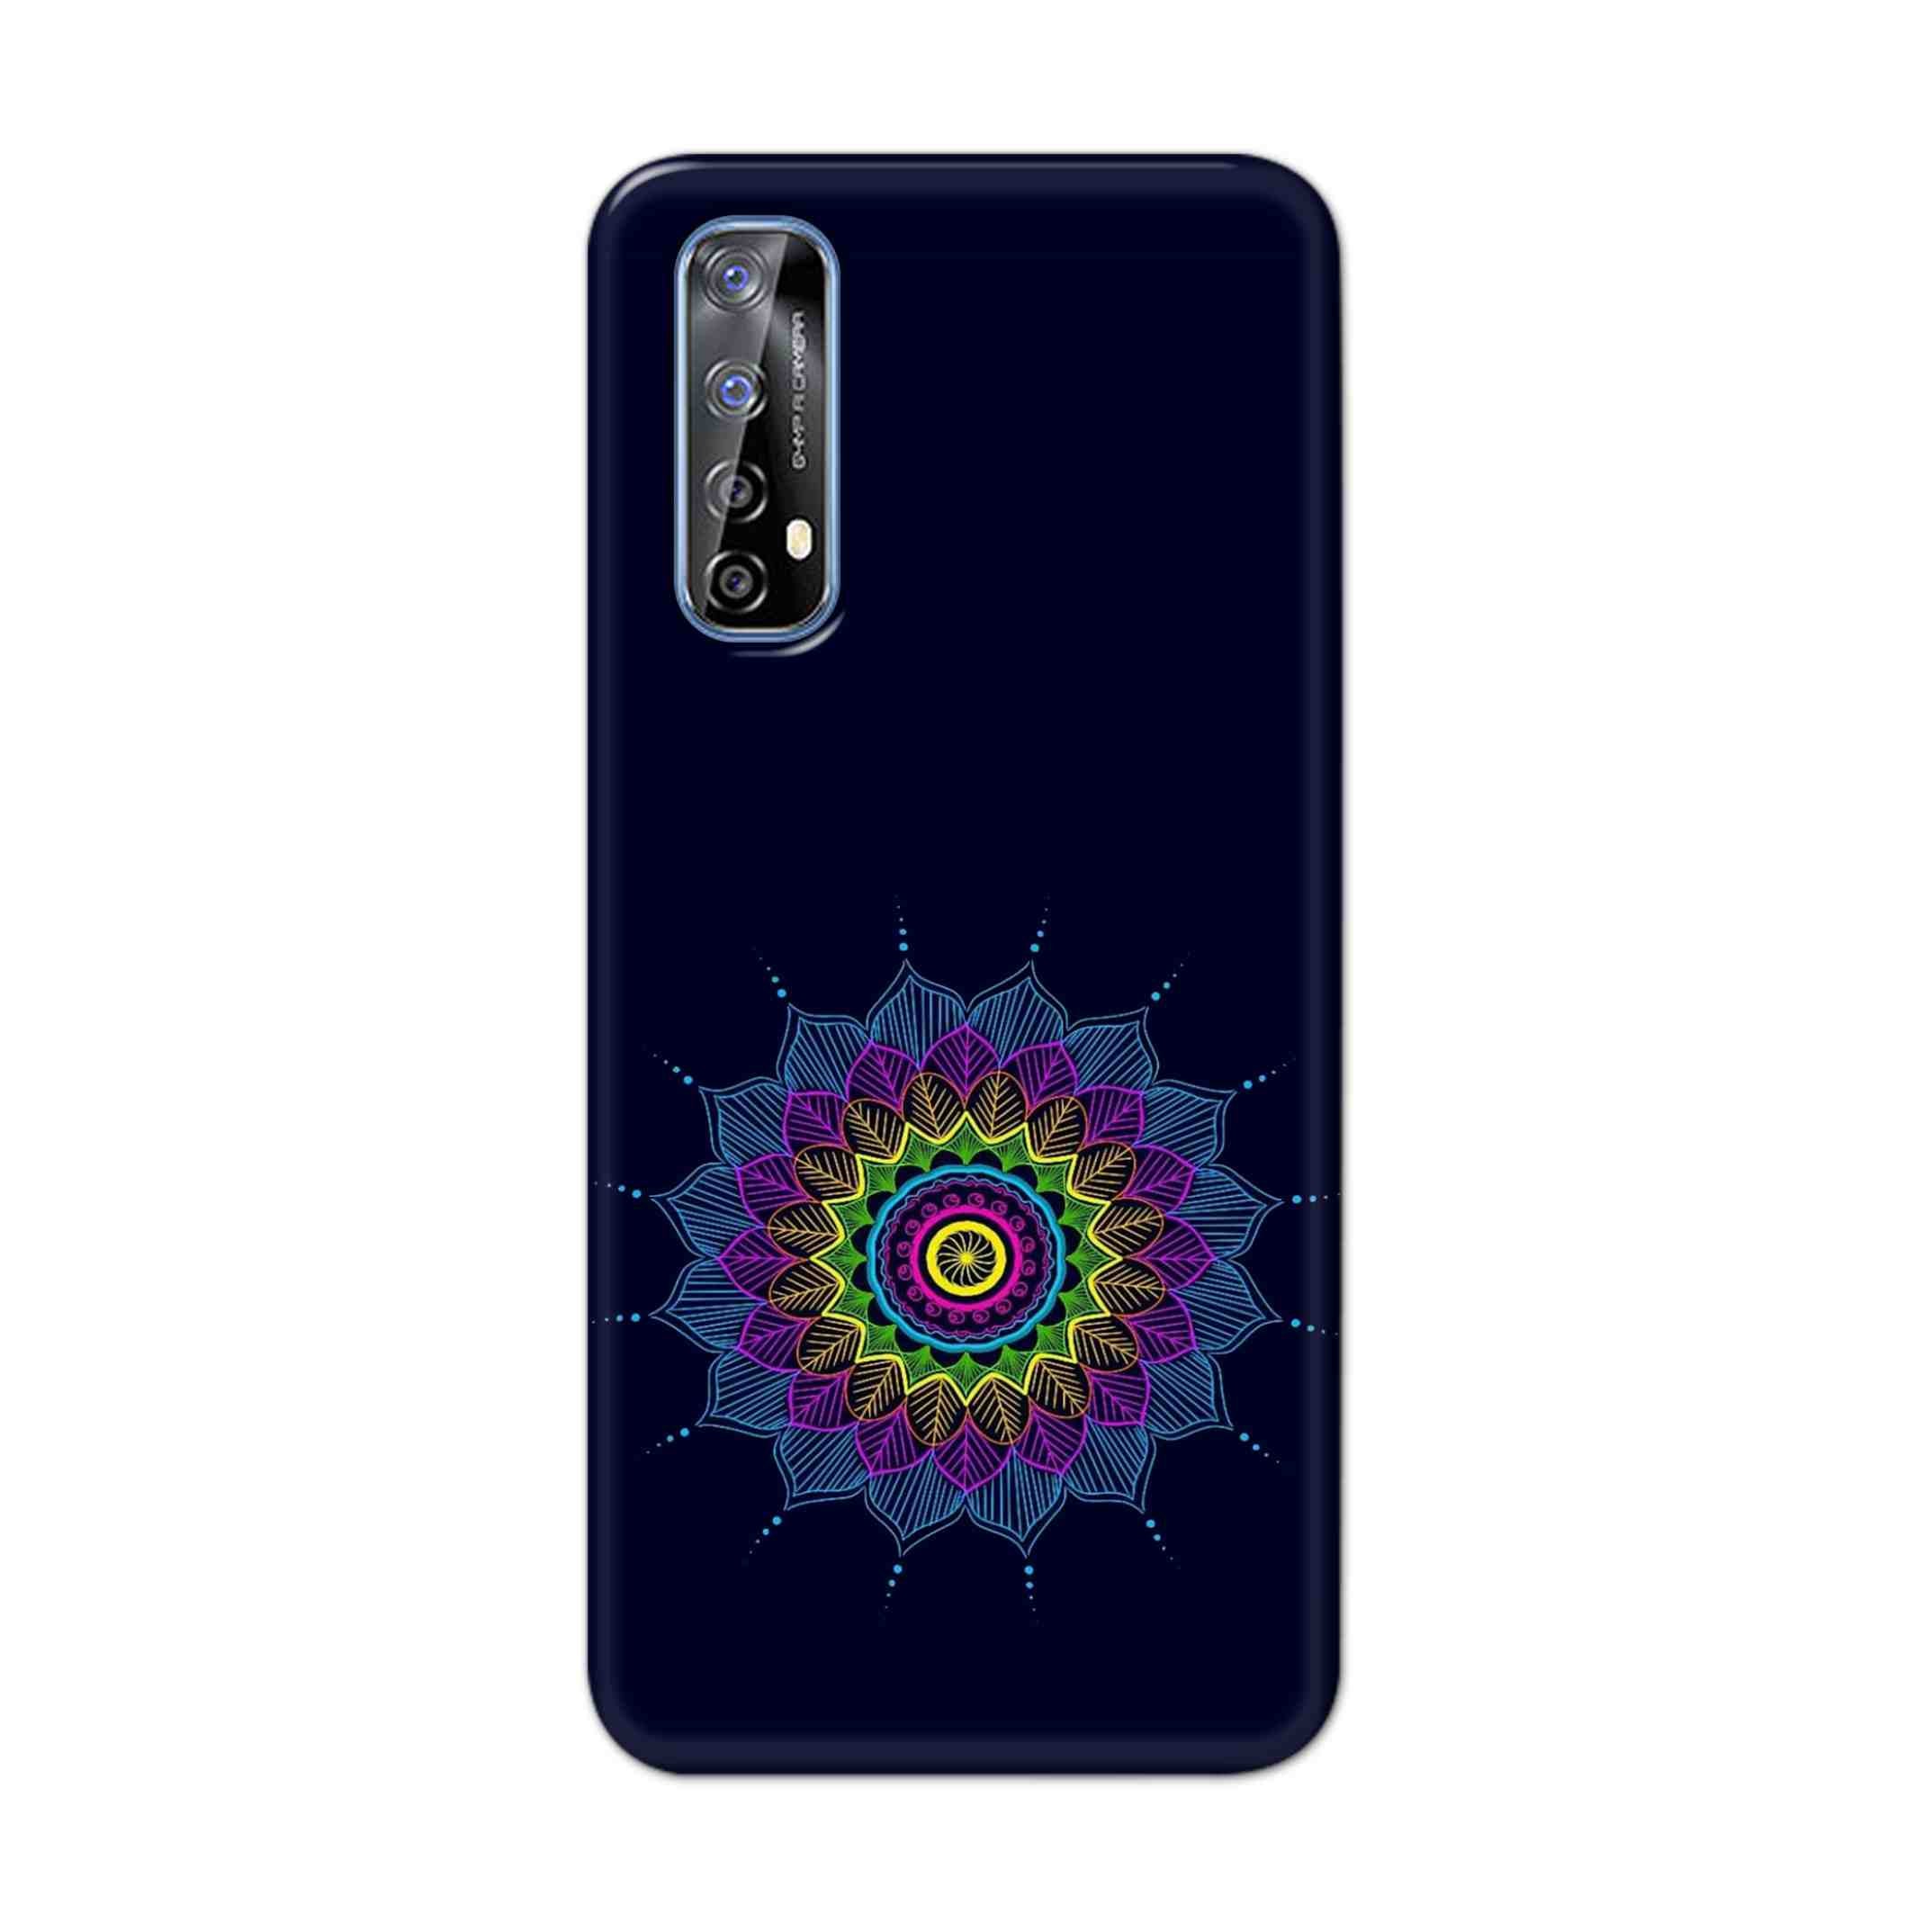 Buy Jung And Mandalas Hard Back Mobile Phone Case Cover For Realme 7 Online